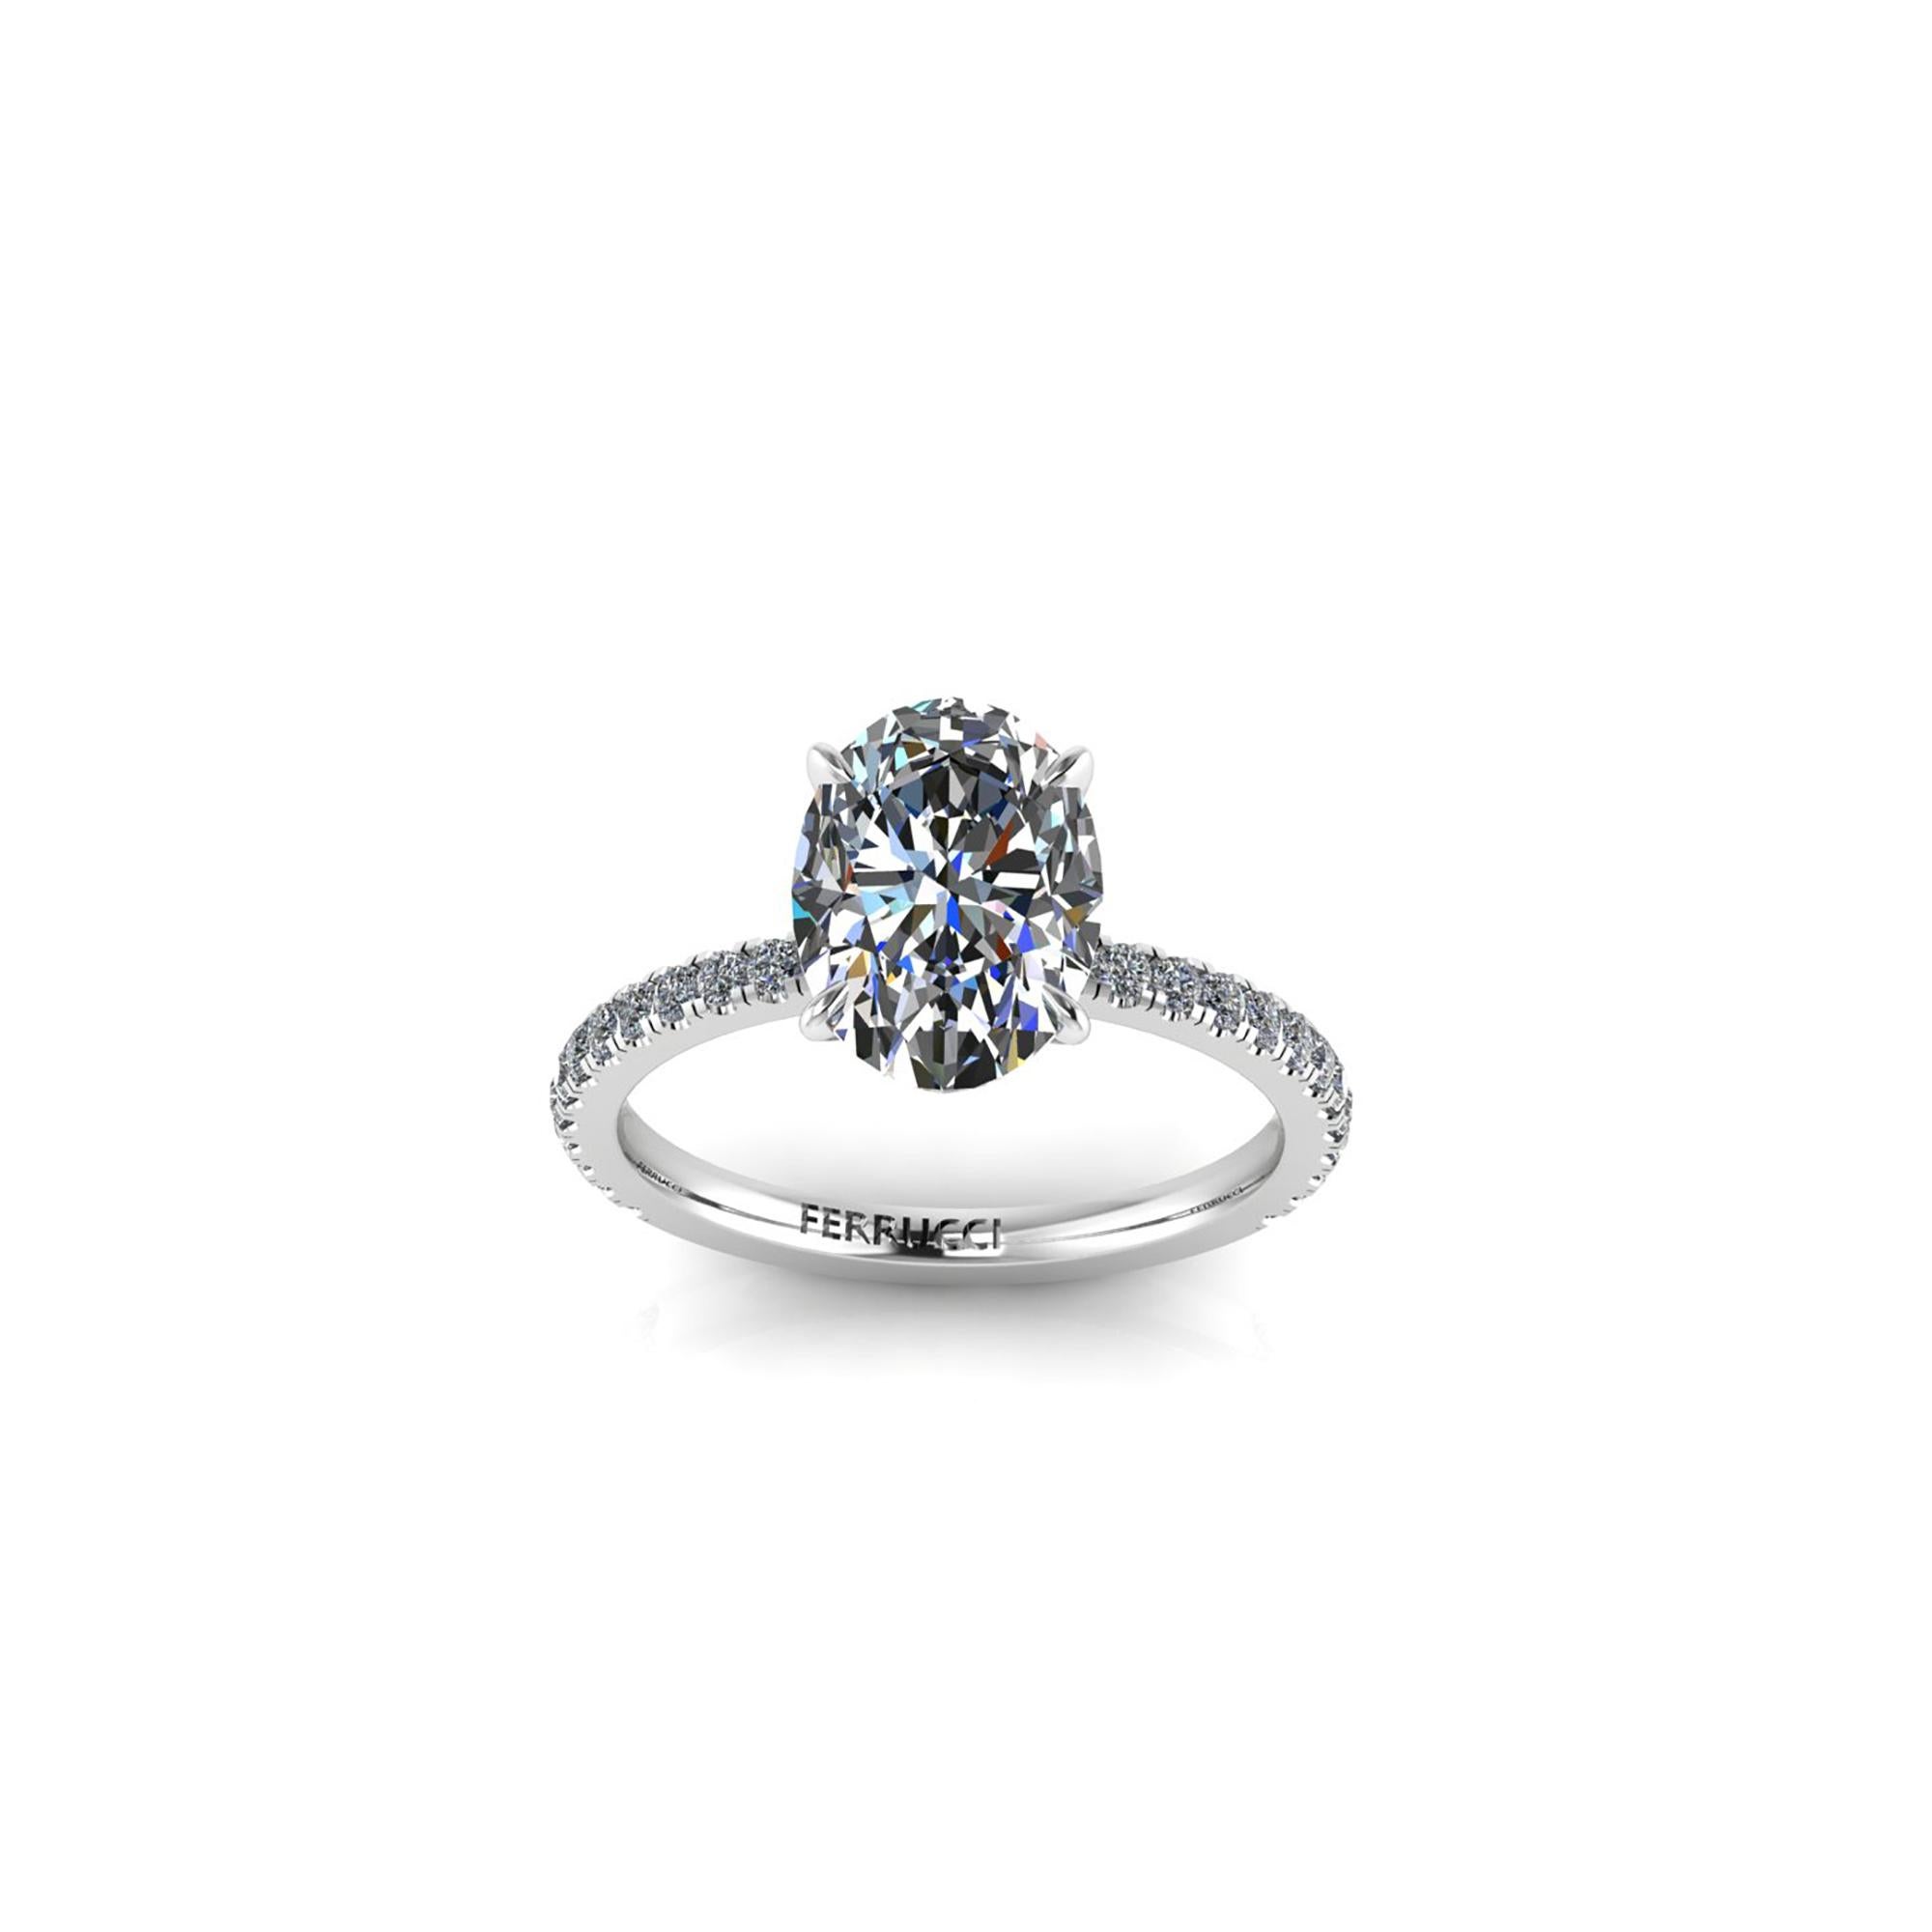 GIA Certified 2.01 carat Oval diamond, G color, VS1 clarity, a higher quality diamond, set in a Platinum 950 ring with Pave diamonds set on the shoulders of the shank to embellish the  center stone, for a total carat weight of 0.30 carat

The ring